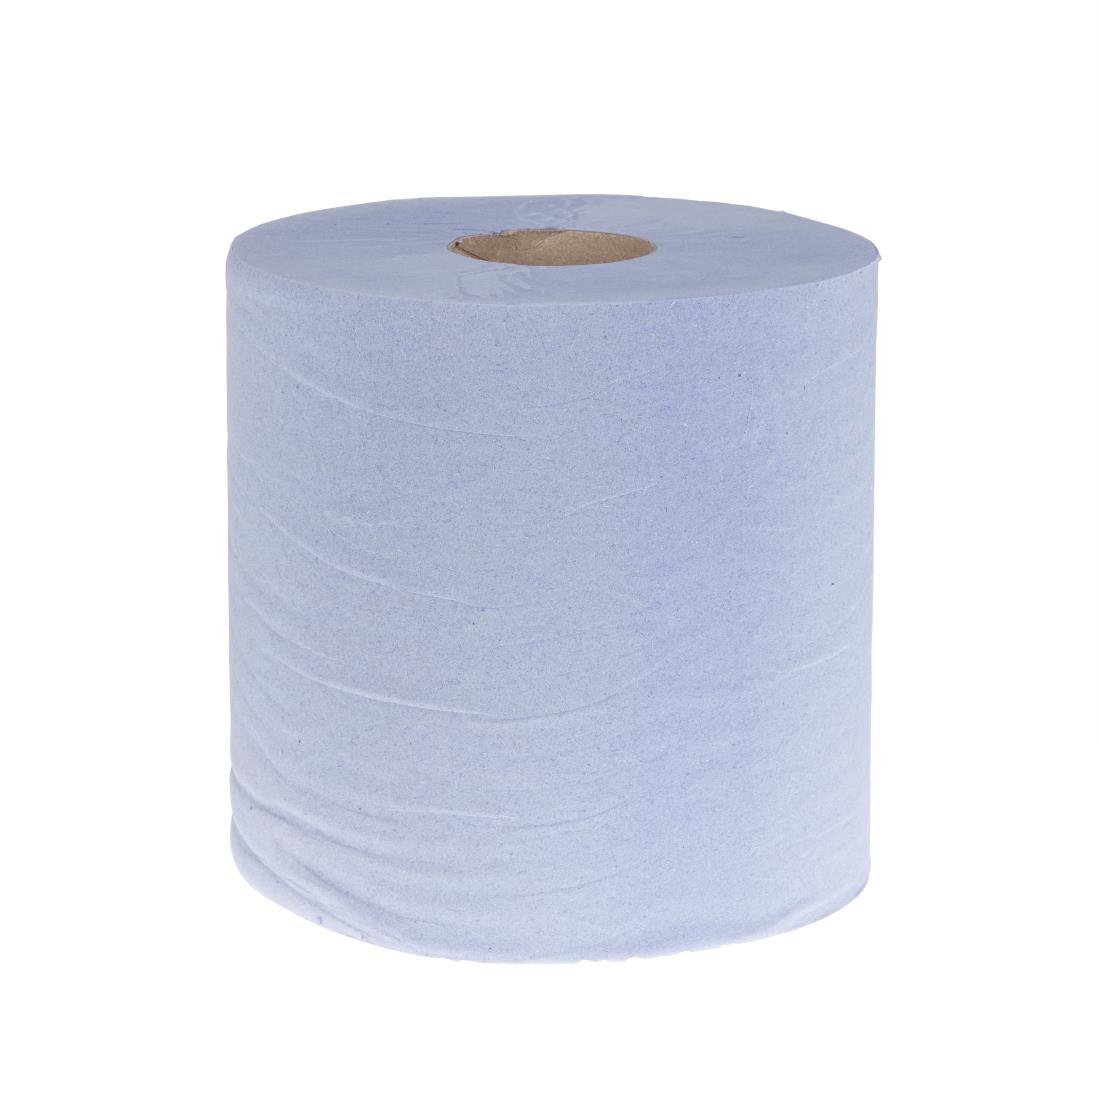 Jantex Blue Centrefeed Rolls 1ply 300m (Pack of 6) - GD833  - 1